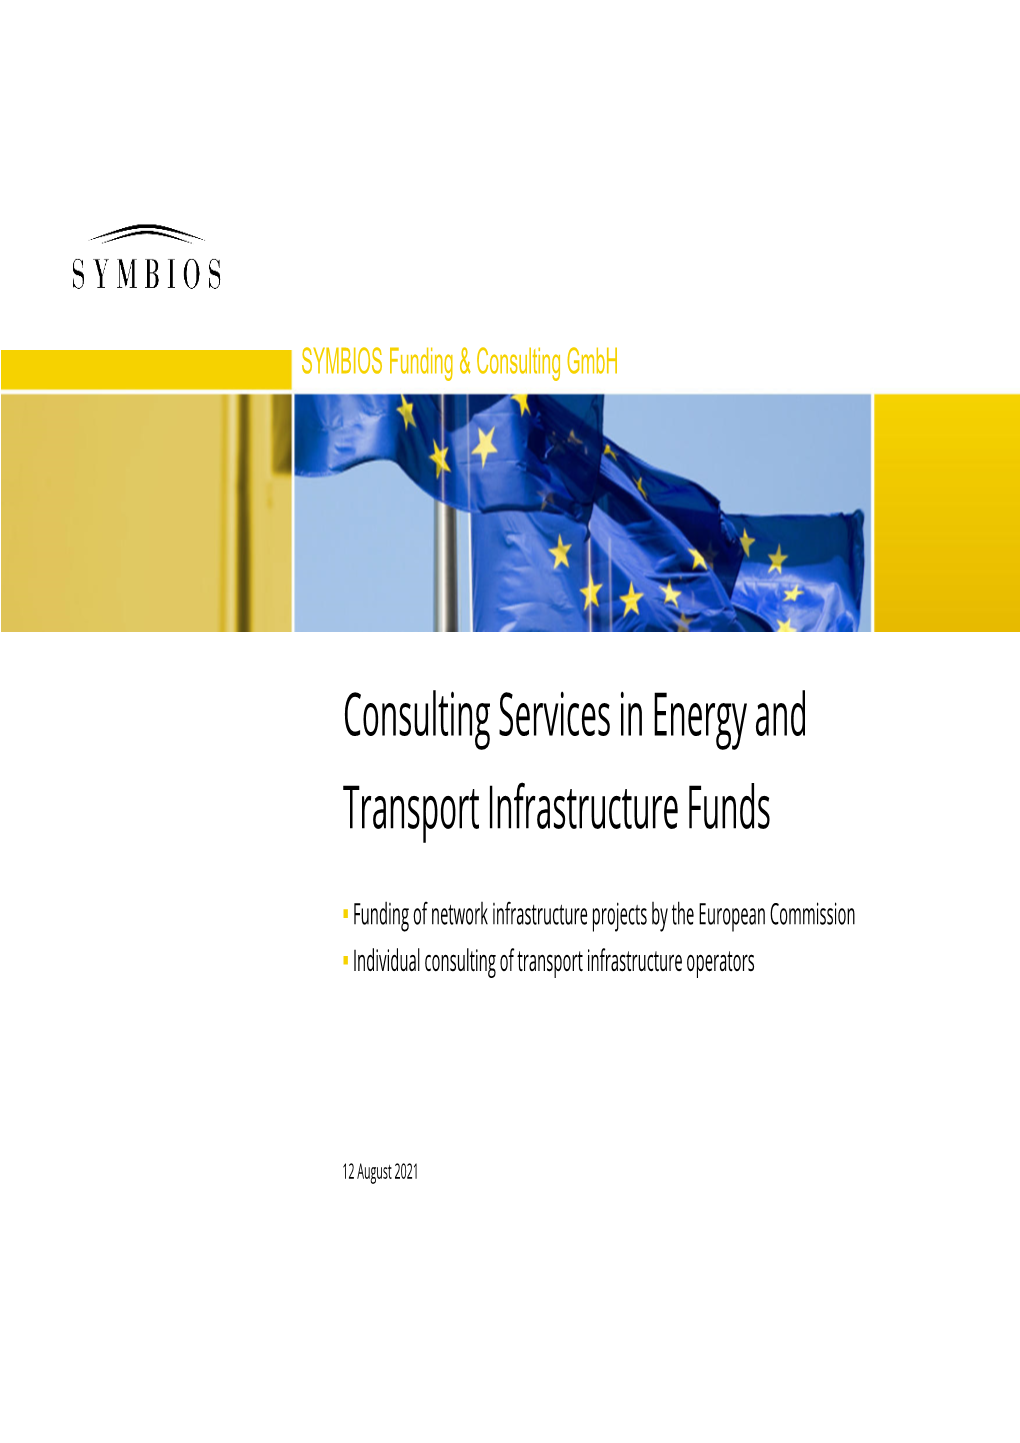 Consulting Services in Energy and Transport Infrastructure Funds